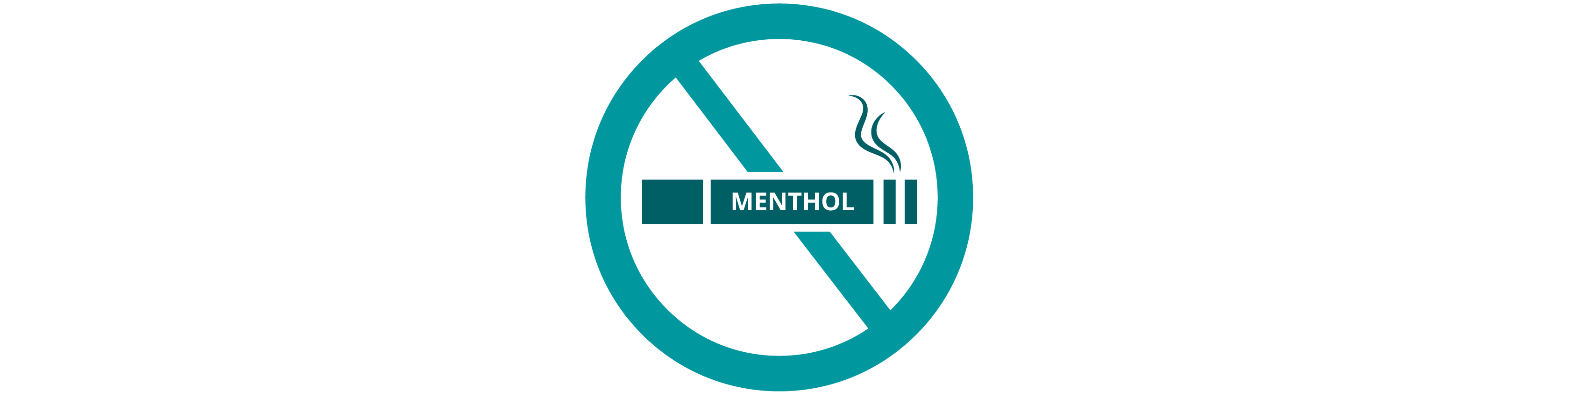 Menthol cigarette ban – what does that mean for you?